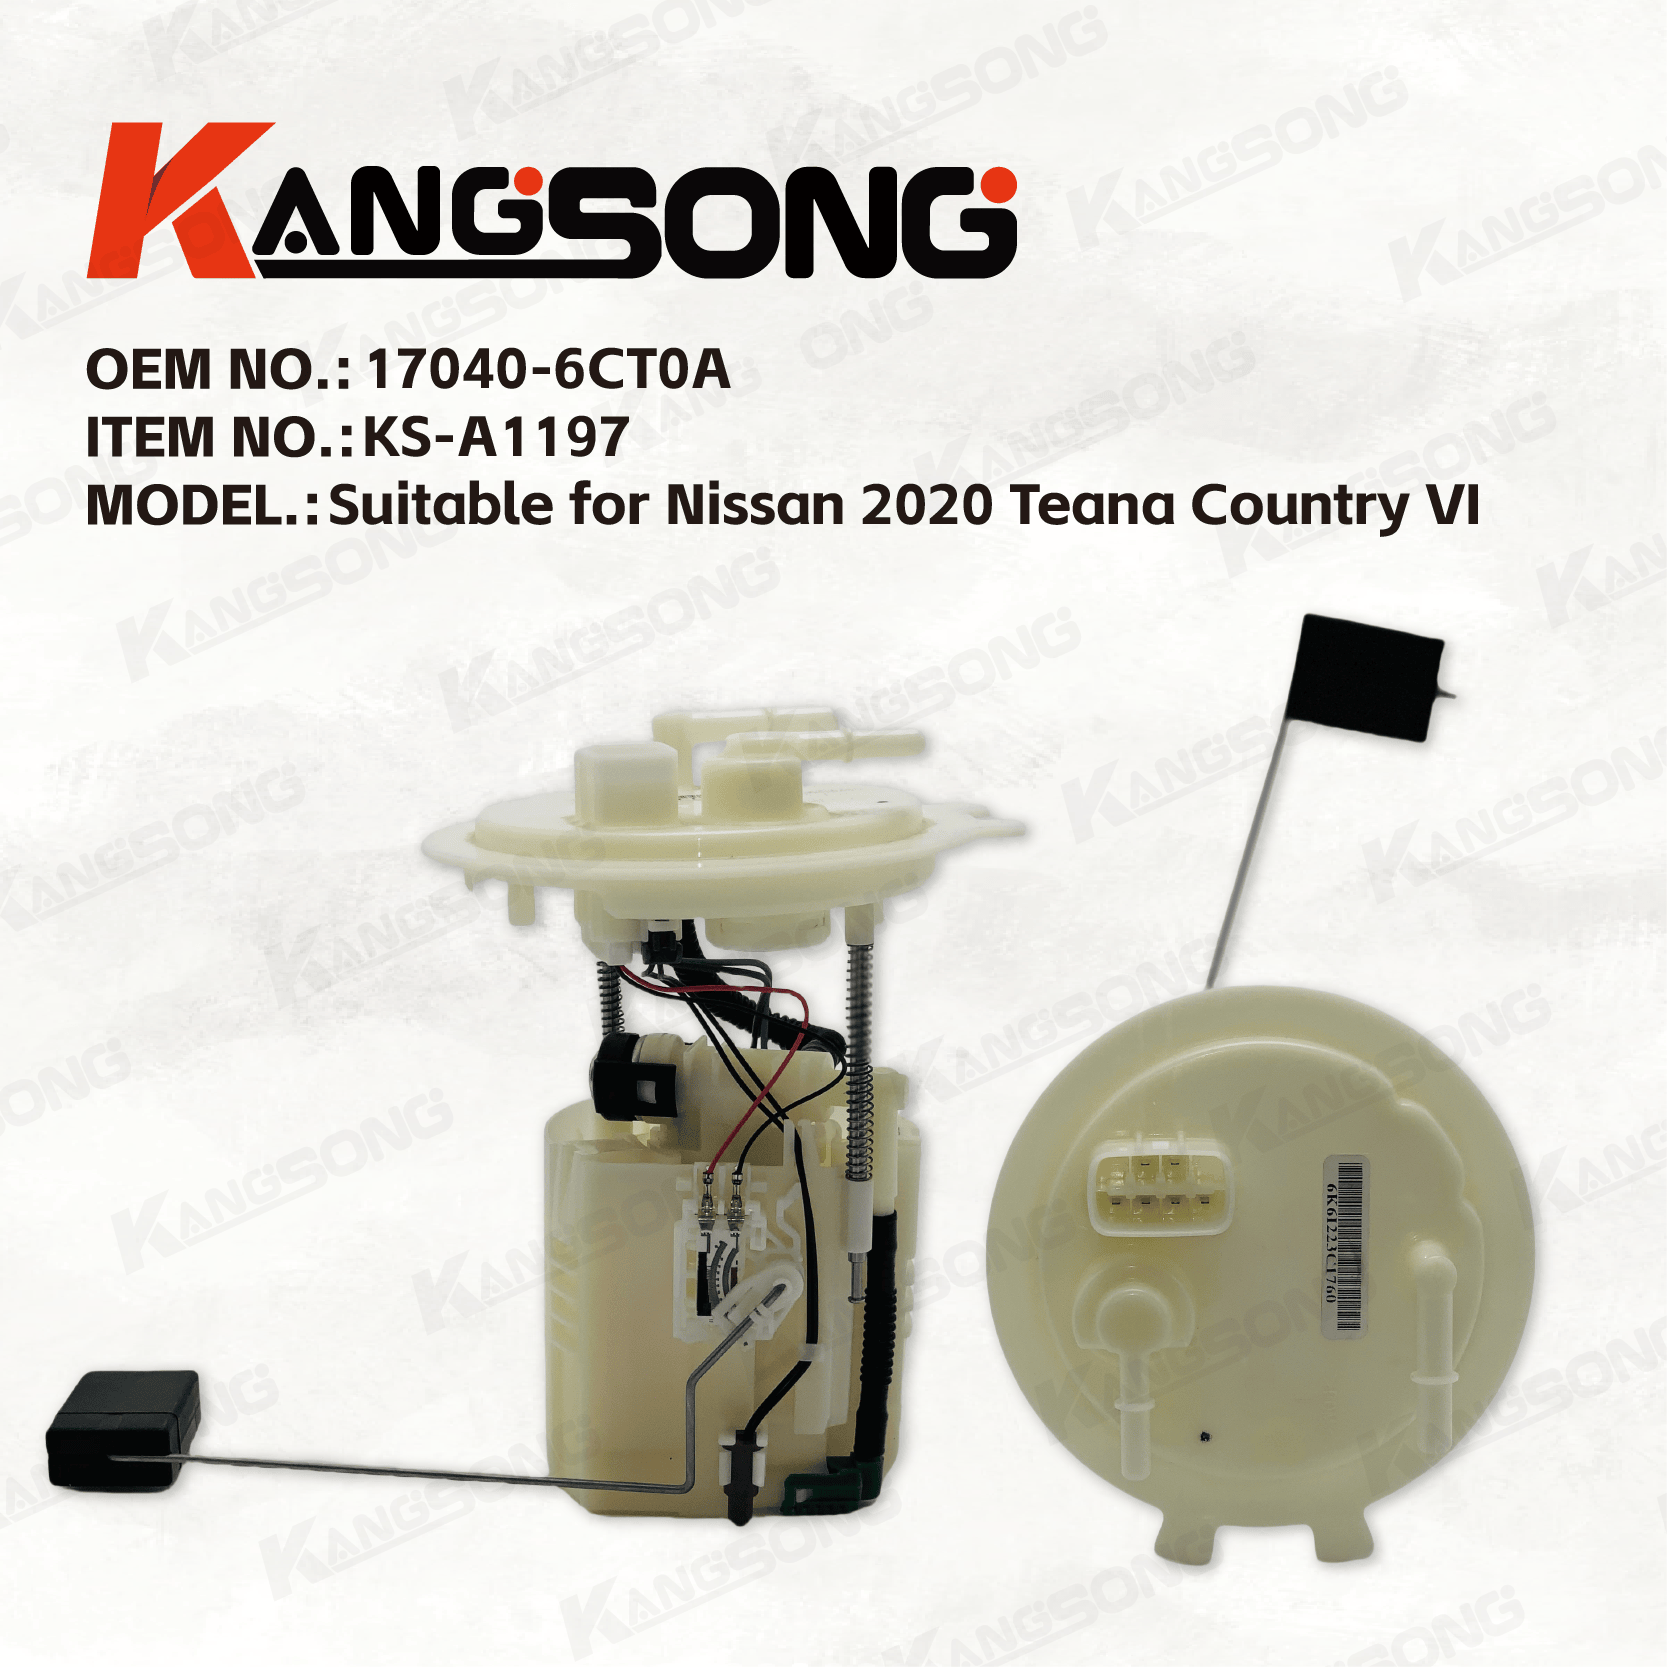 Applicable to Nissan 2020 Teana Country VI /17040-6CT0A/Fuel Pump Assembly/KS-A1197